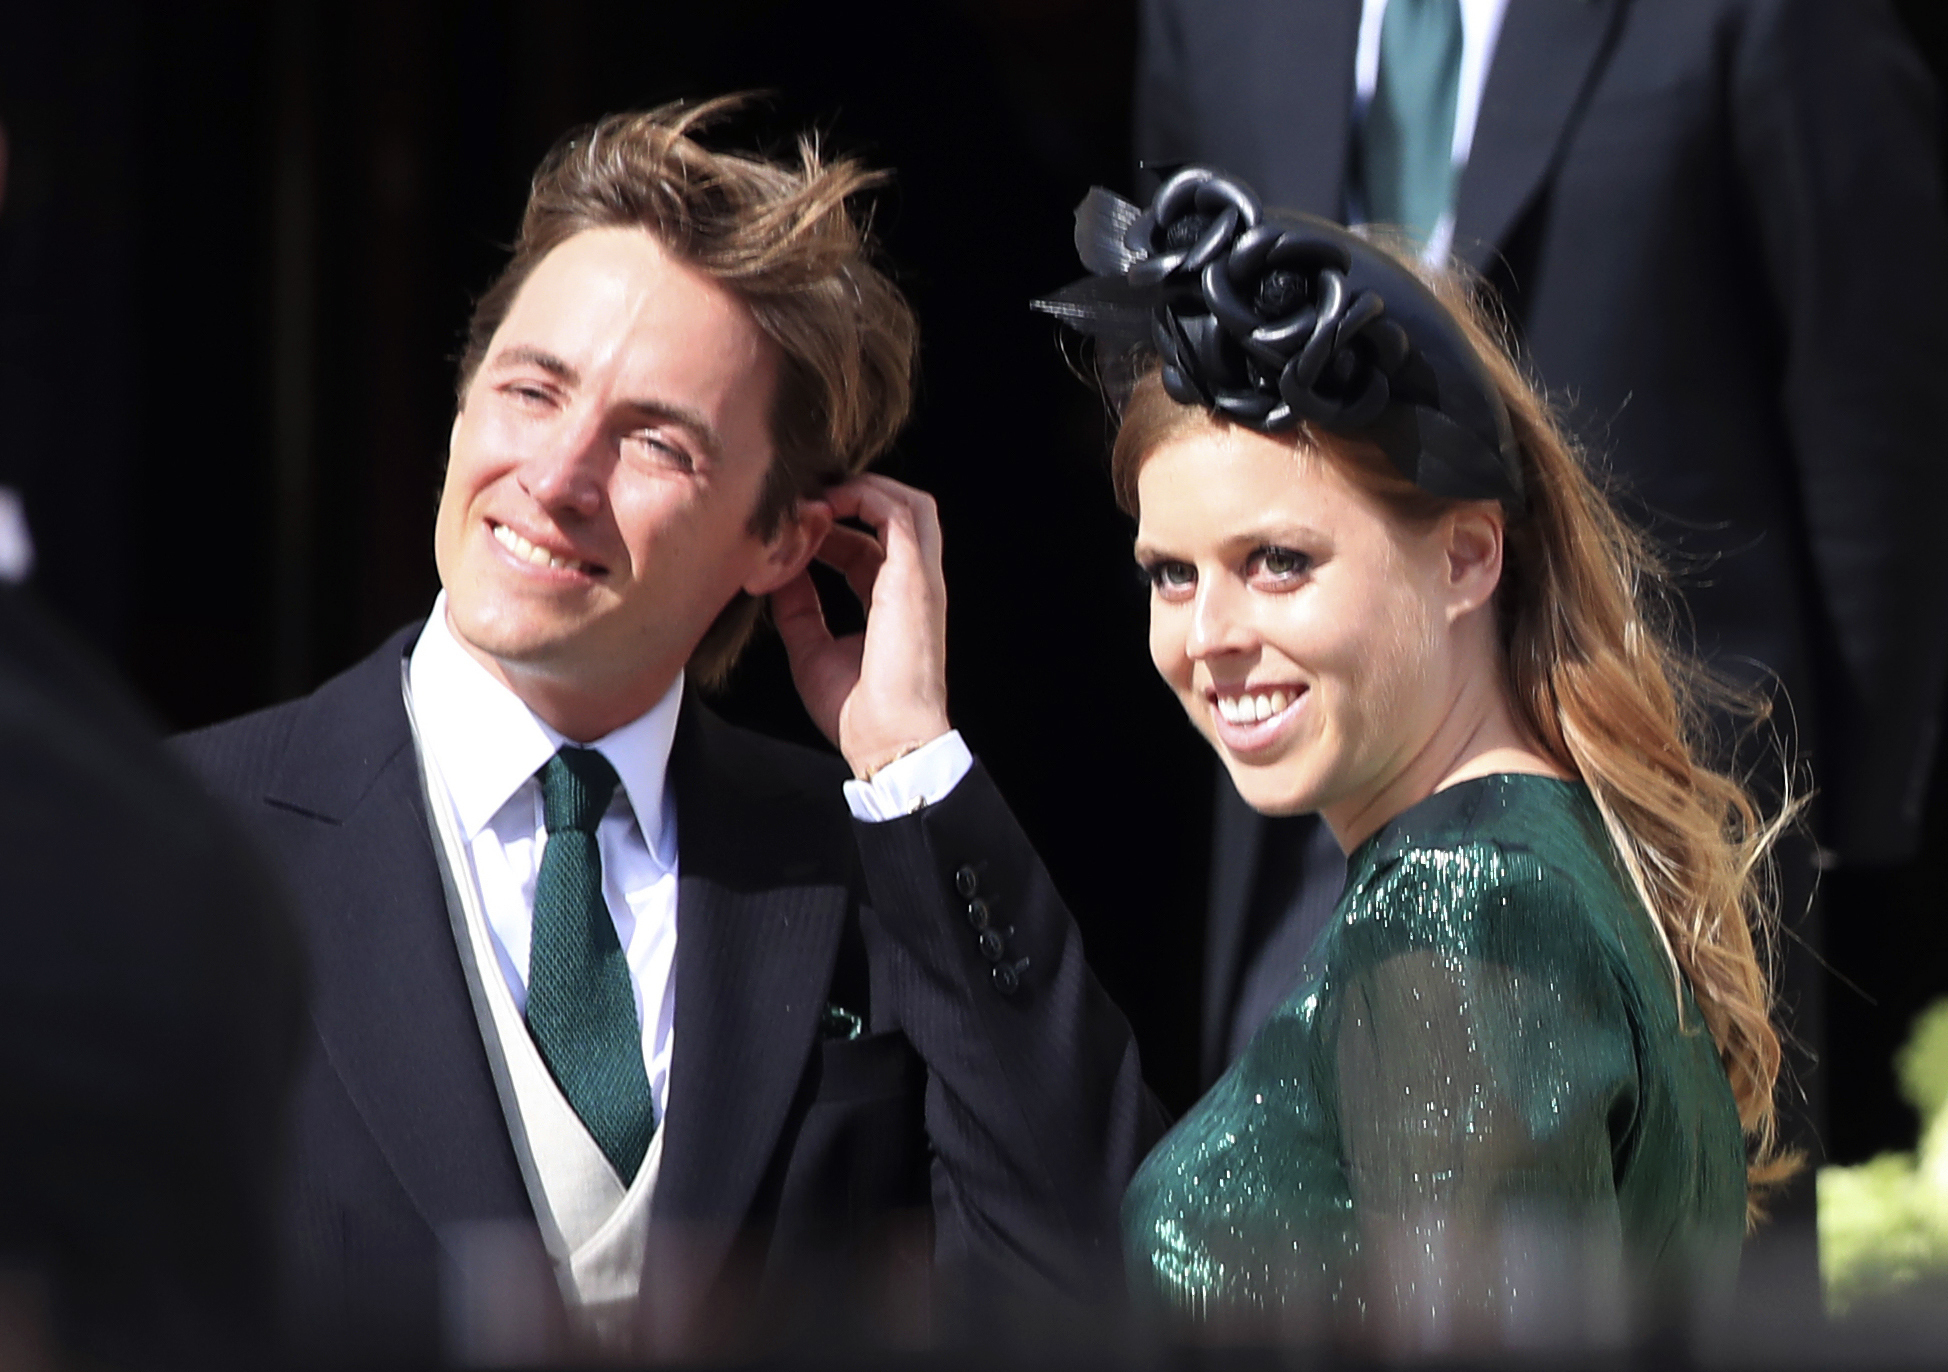 FILE - In this Aug. 31, 2019 file photo, Britain's Princess Beatrice with her fiance, Edoardo Mapelli Mozzi, attend the wedding of Ellie Goulding and Caspar Jopling, in York, England. Buckingham Palace says that Princess Beatrice has got married in a private ceremony, with her grandmother Queen Elizabeth II in attendance. Beatrice married Edoardo Mapelli Mozzi Friday, July 17, 2020 at The Royal Chapel of All Saints at Royal Lodge, Windsor. The monarch, the Duke of Edinburgh and other close family members attended, in line with COVID-19 guidelines. Photo: AP